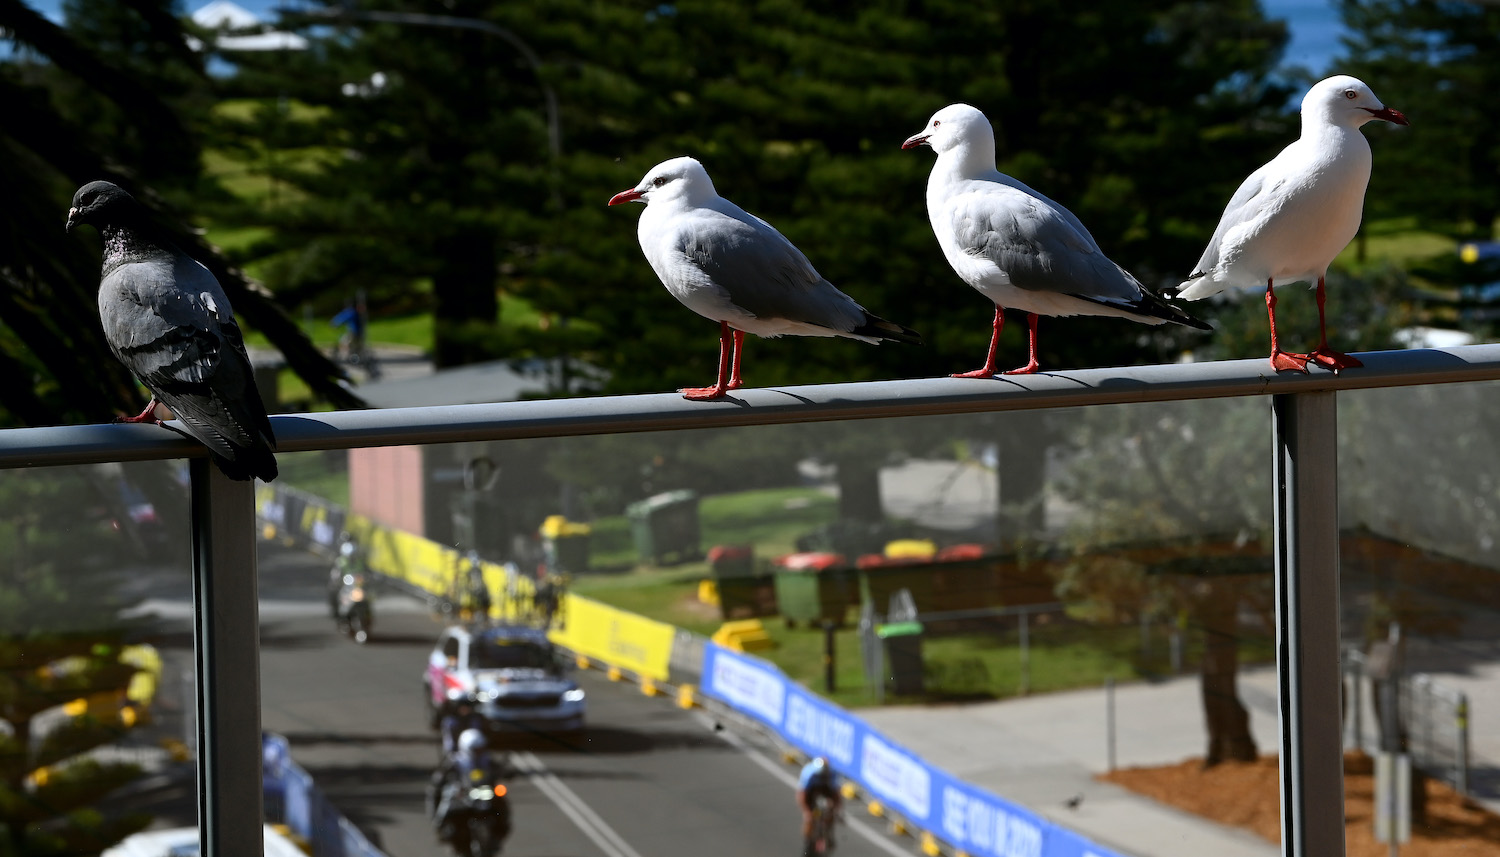 WOLLOGONG, AUSTRALIA - SEPTEMBER 19: Detailed view of birds perched on a railing during the 95th UCI Road World Championships 2022 - Men U23 Individual Time Trial a 28,8km / #Wollongong2022 / on September 19, 2022 in Wollongong, Australia. (Photo by Tim de Waele/Getty Images)